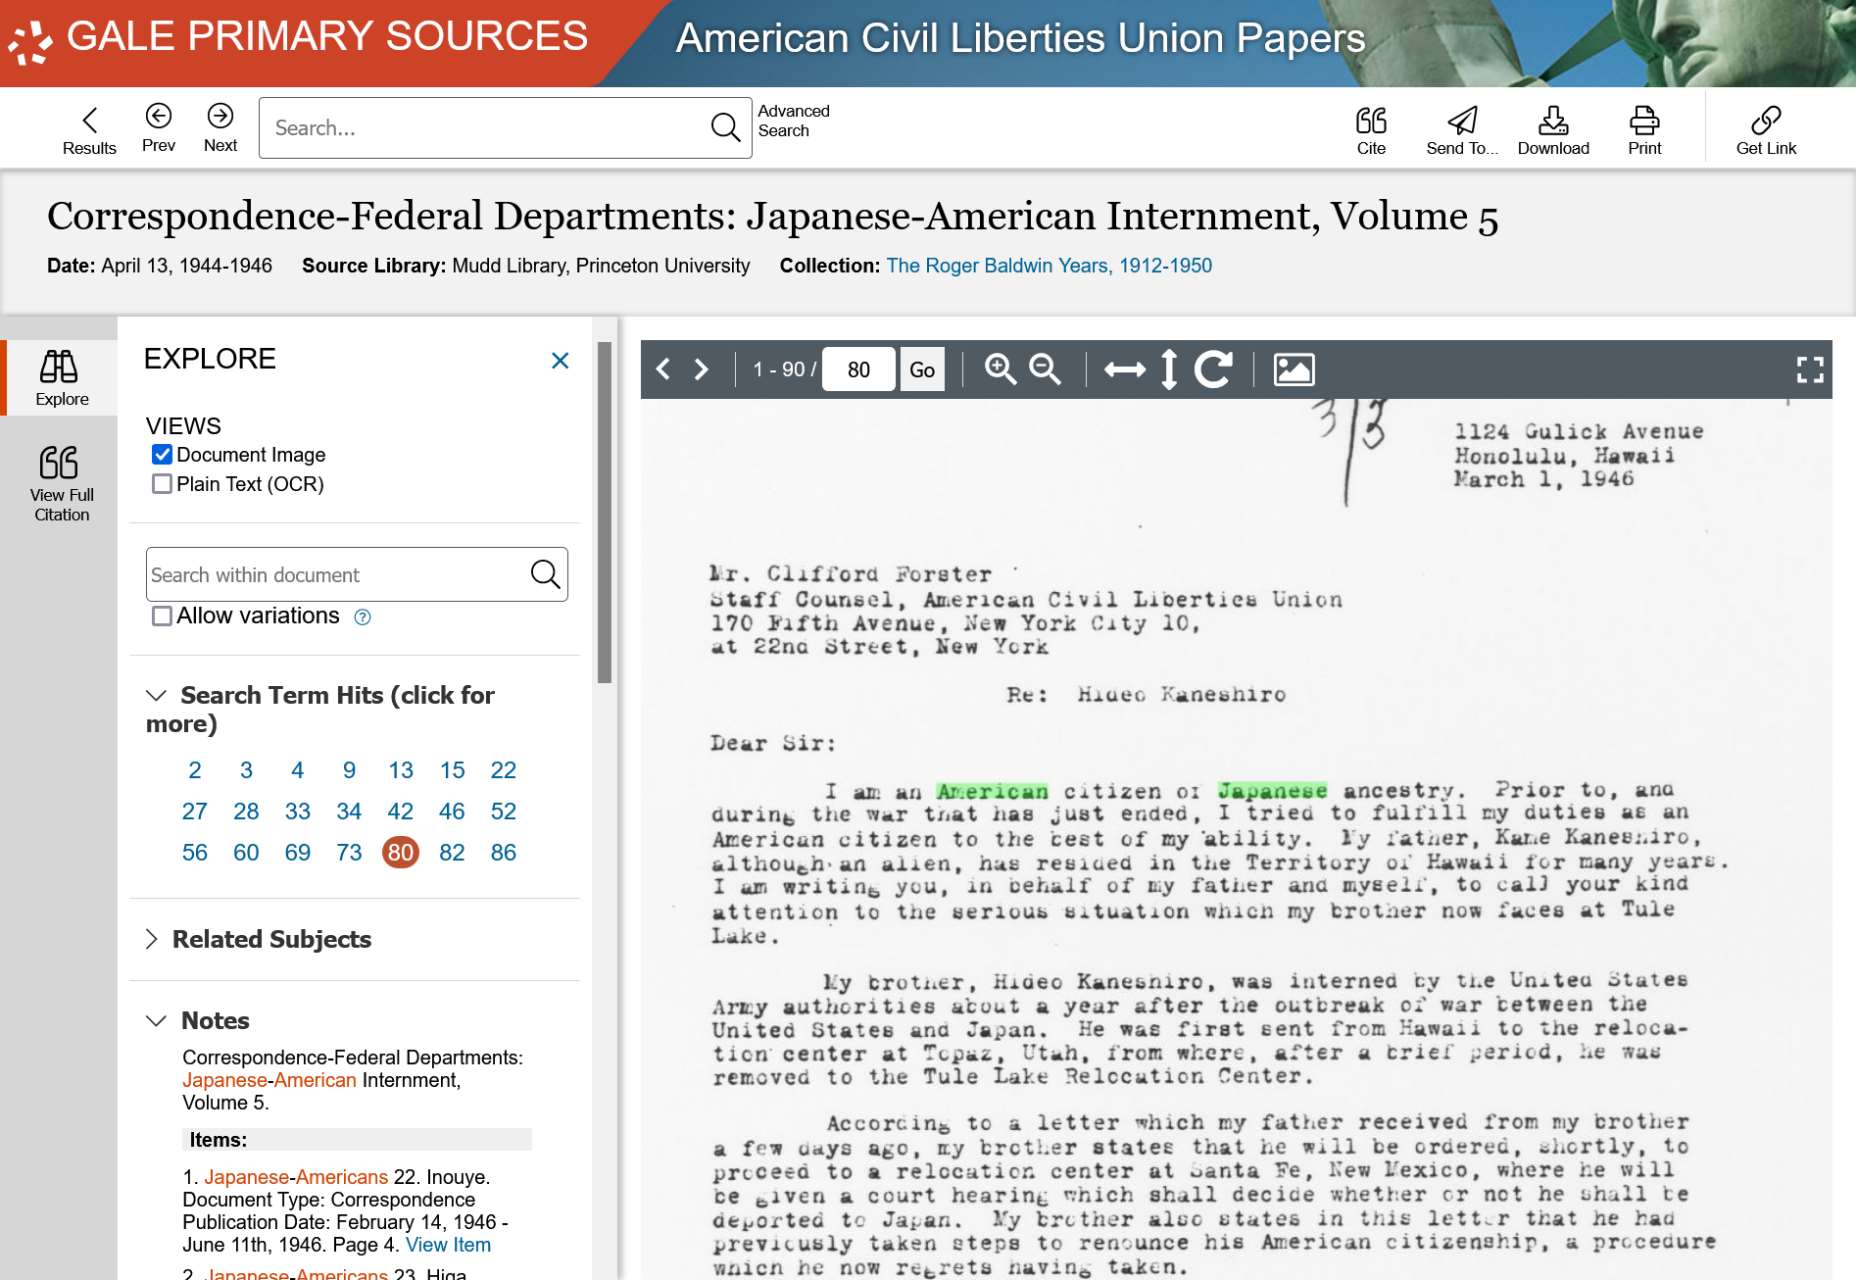 The Making of Modern Law: American Civil Liberties Union Papersの文献表示画面